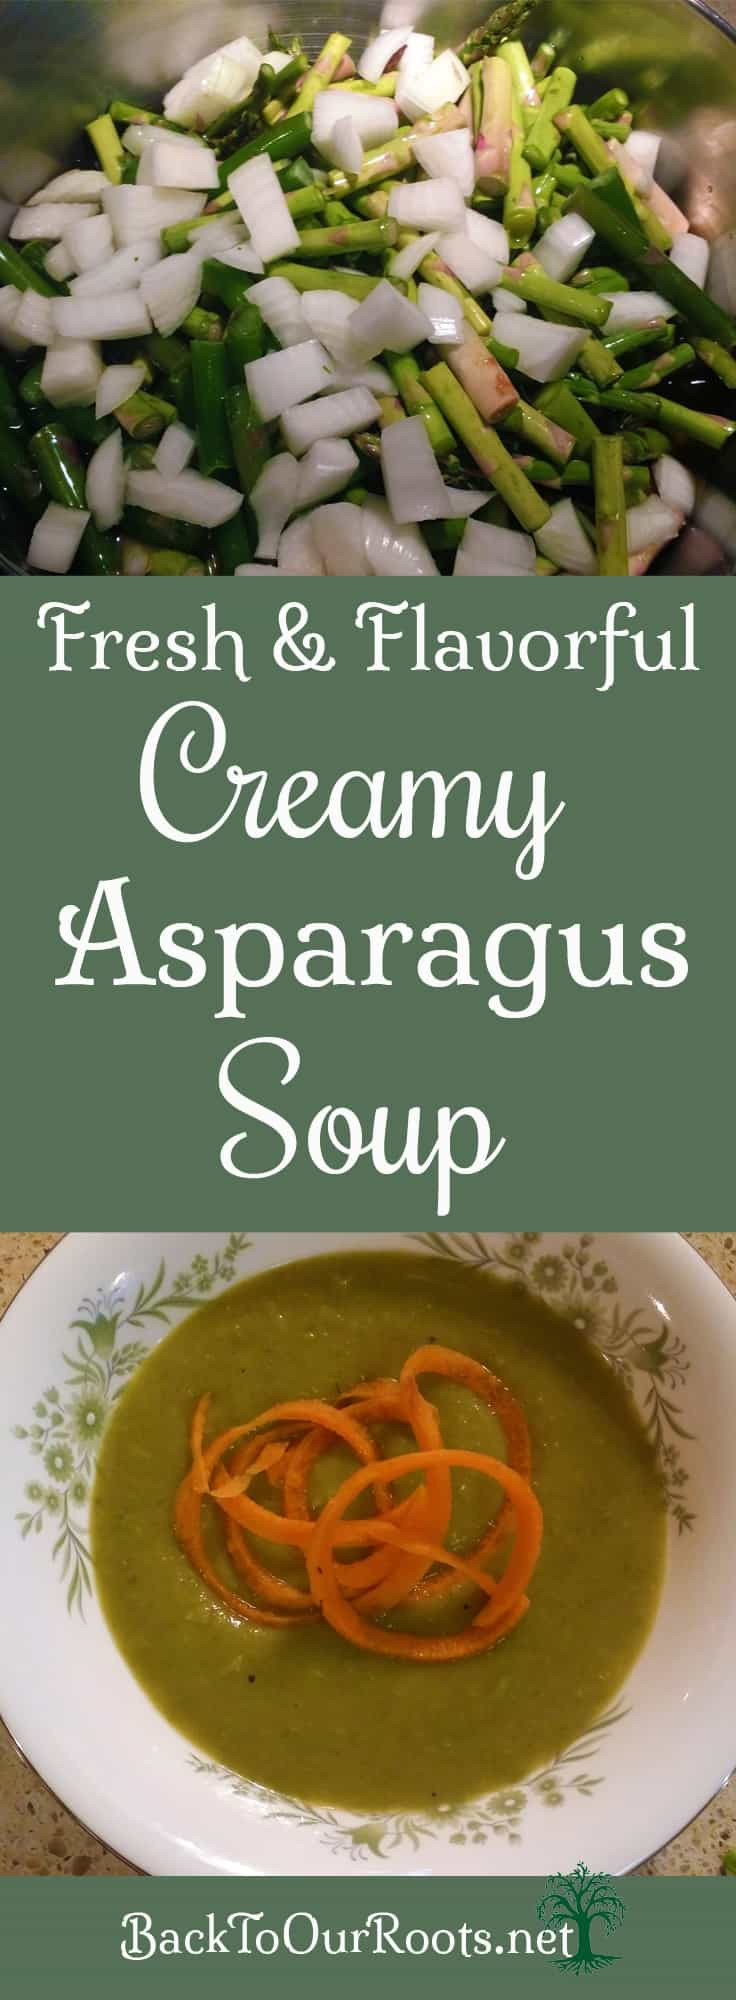 Healthy Asparagus Soup
 Creamy and Delicious Asparagus Soup Back to Our Roots